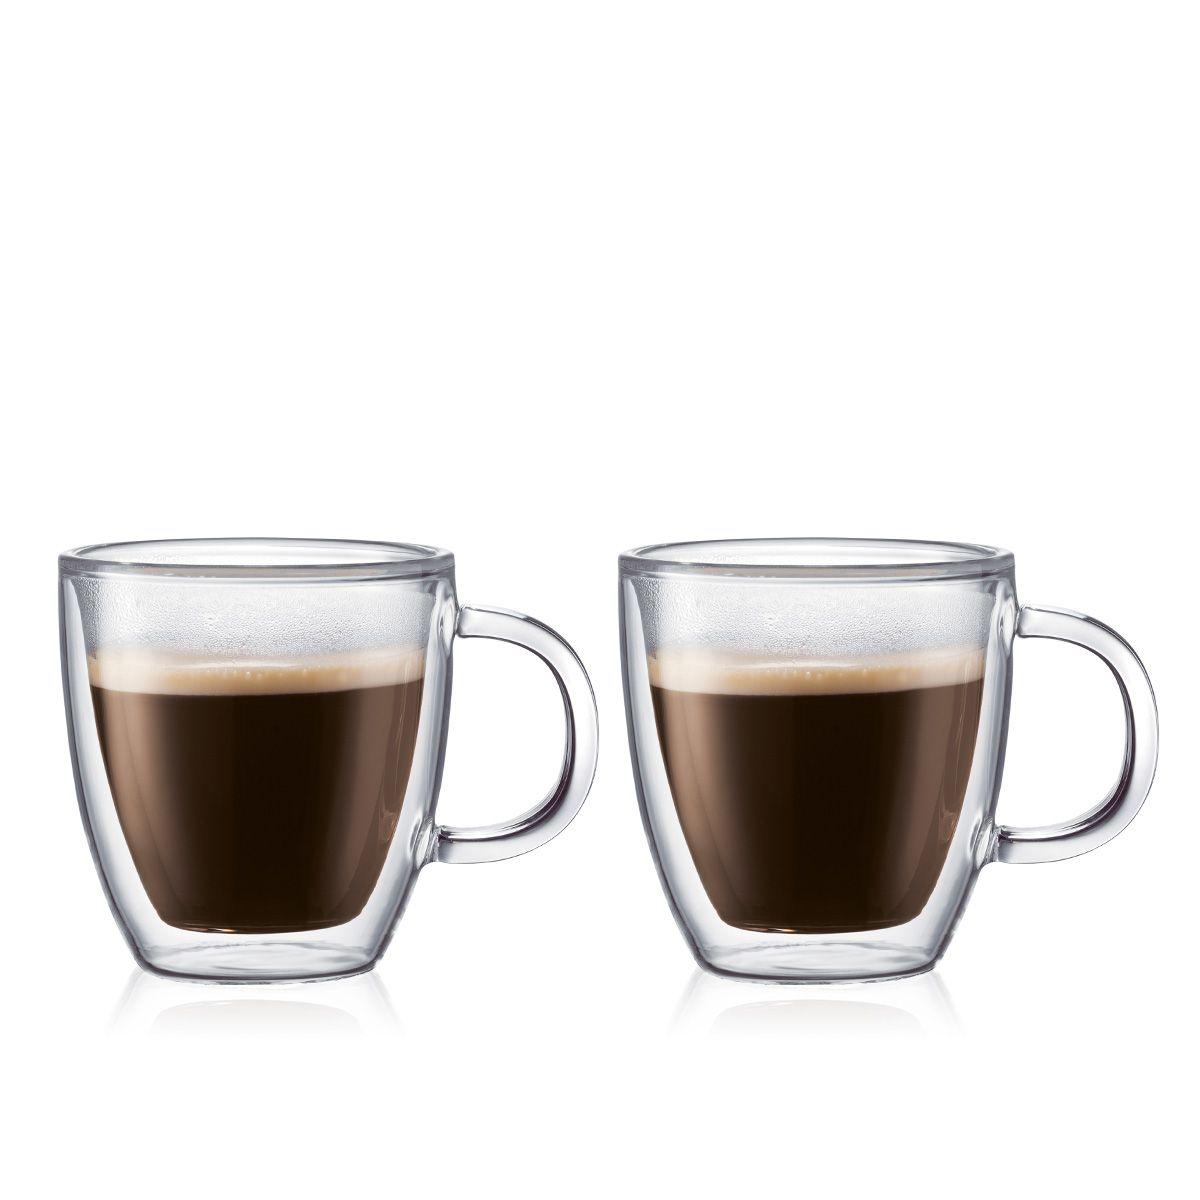 https://www.shopbeanwise.shop/wp-content/uploads/1690/51/get-the-best-bodum-bistro-double-wall-espresso-cup-5oz-set-of-2-bodum-available-at-unbeatable-prices_0.png